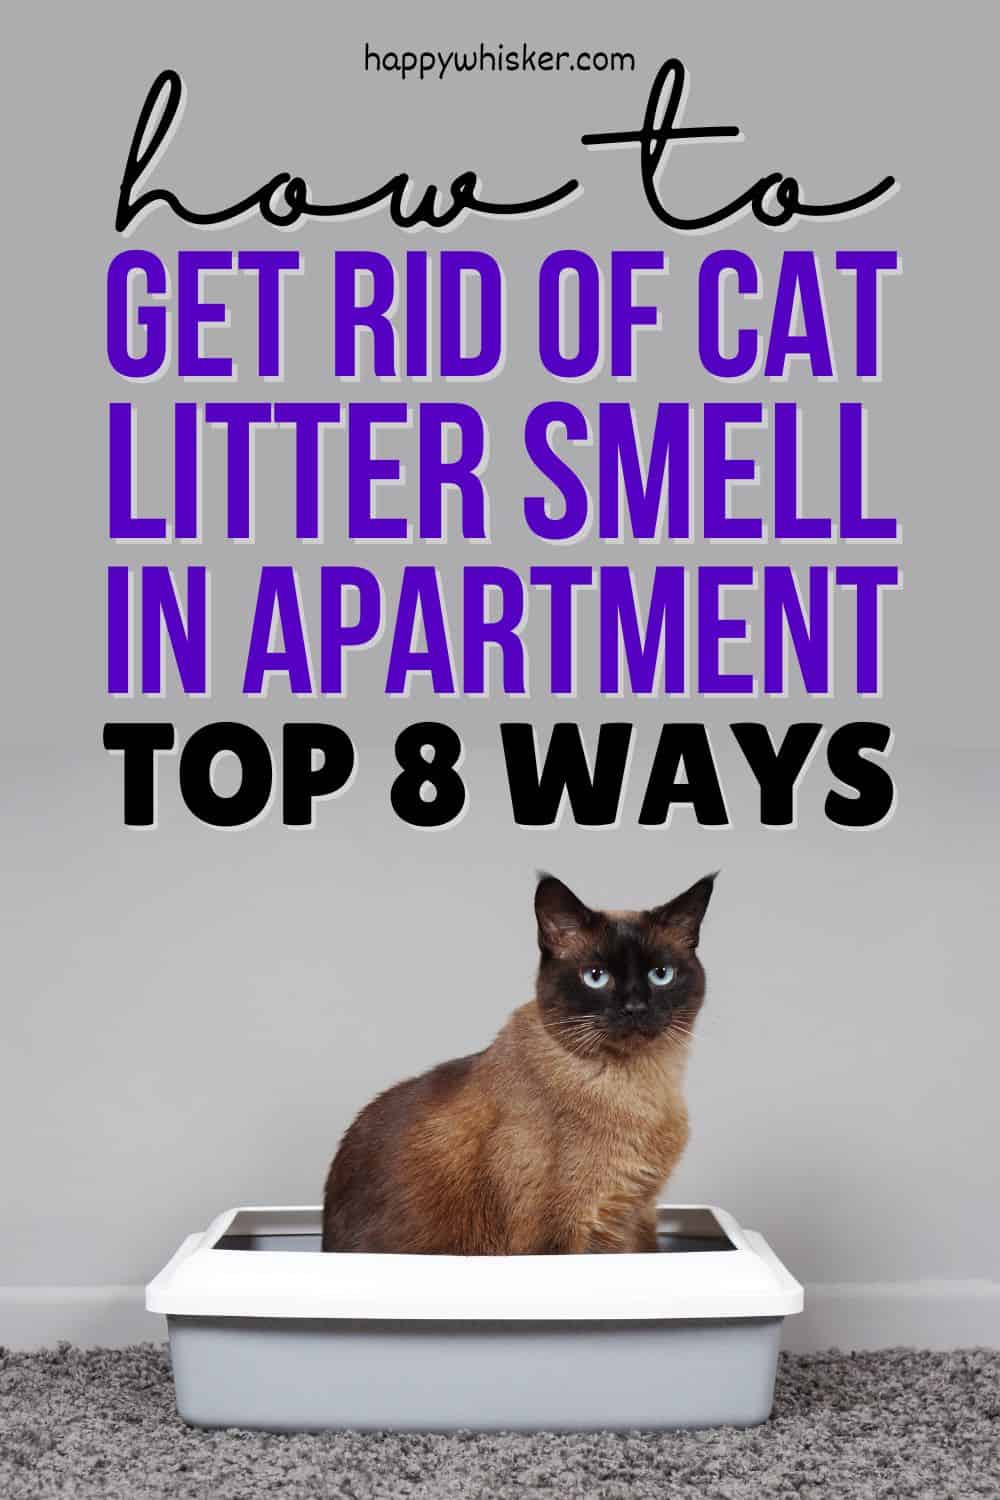 How To Get Rid Of Cat Litter Smell In Apartment Top 8 Ways Pinterest